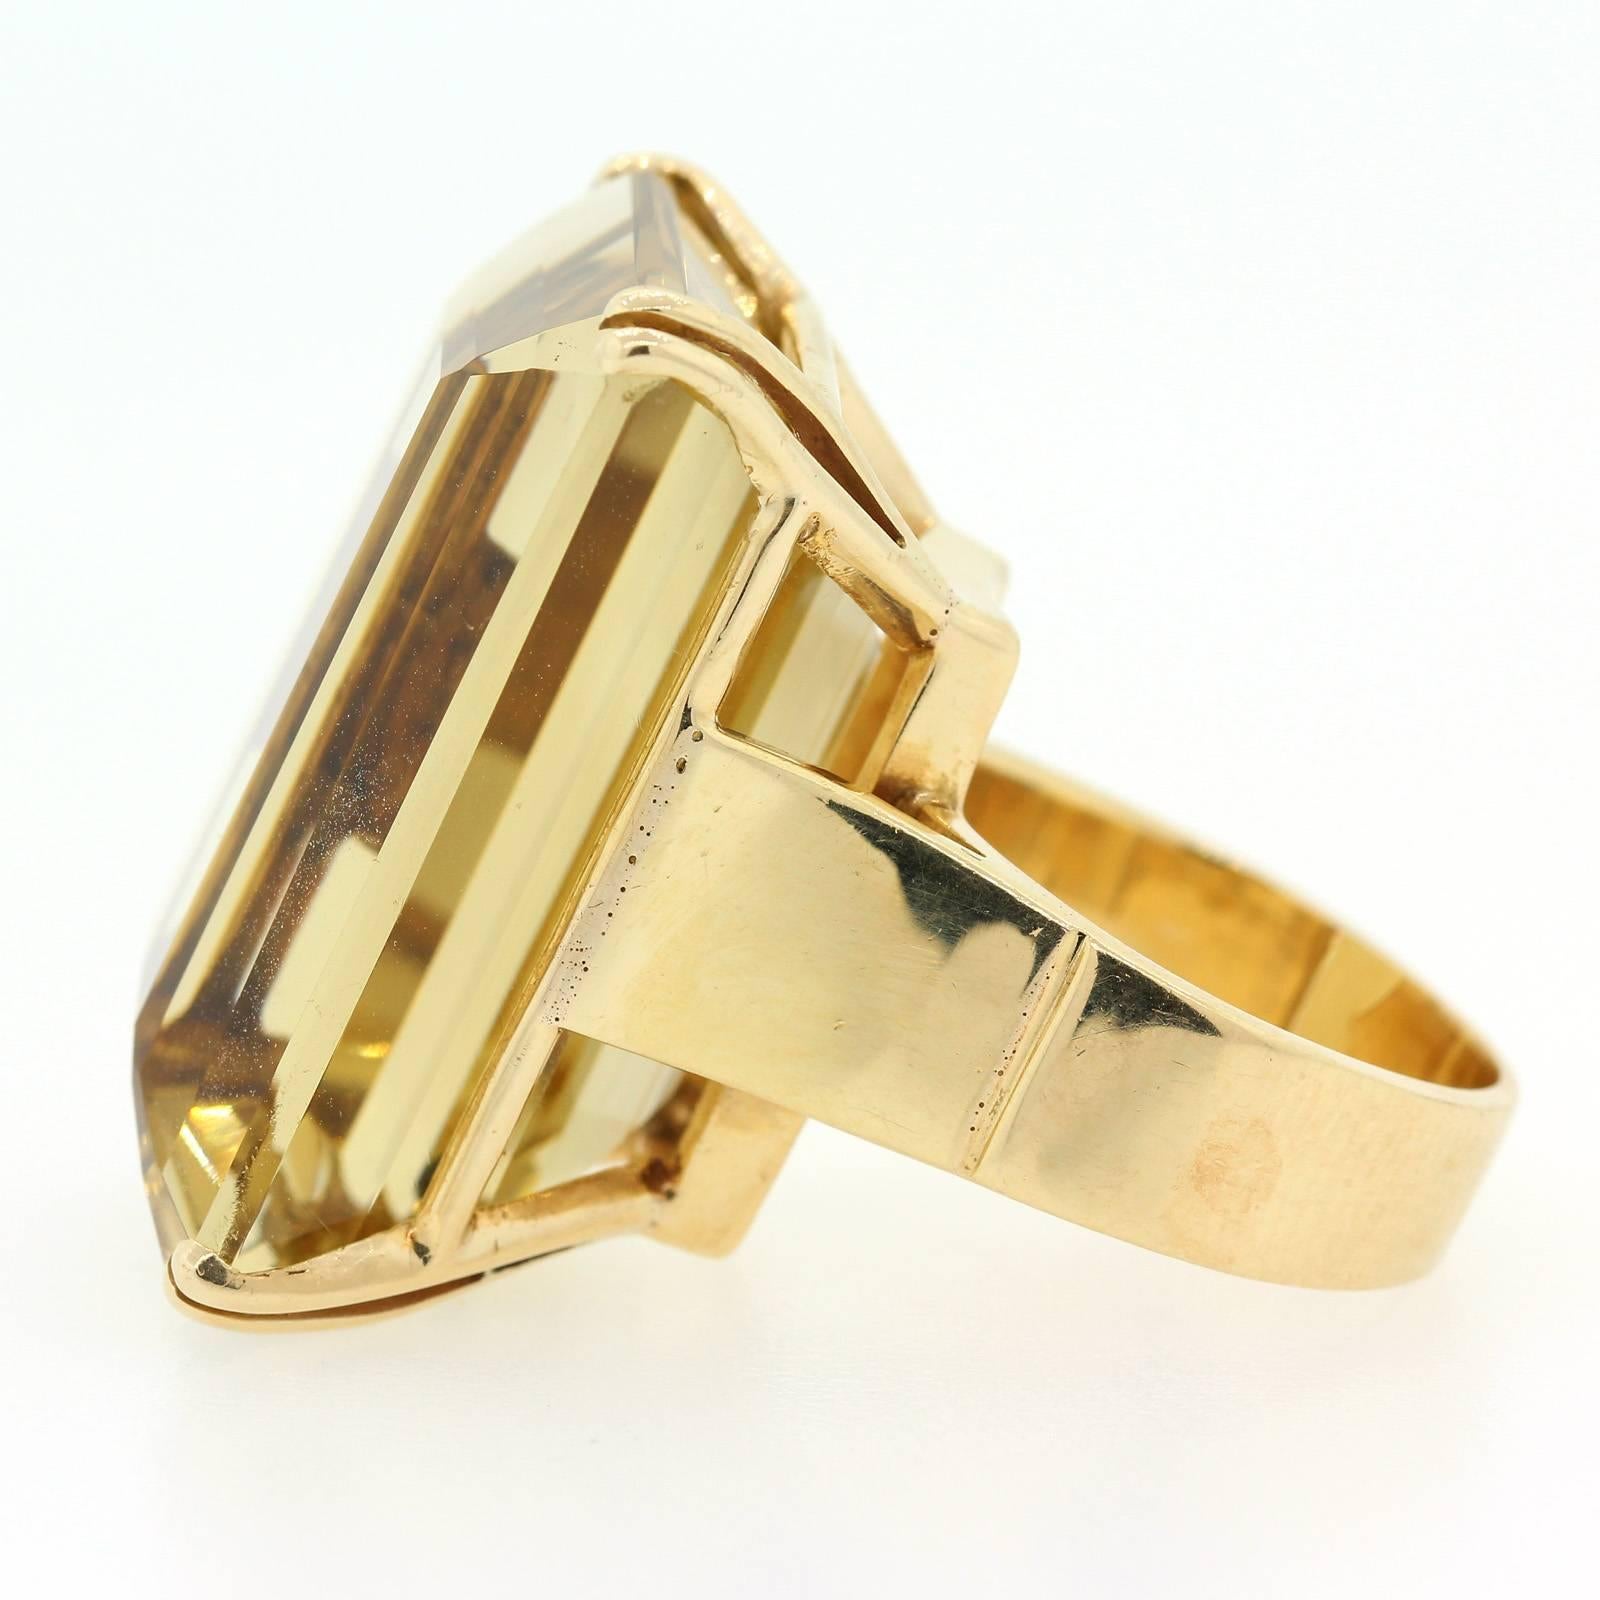 A strong statement projection from this 1950s large Citrine 14KT yellow gold ring.  The Emerald Cut Citrine weighs approximately seventy carat is beautifully presented on a four fluted prong double wire basket.   Pretty exceptional large ring!